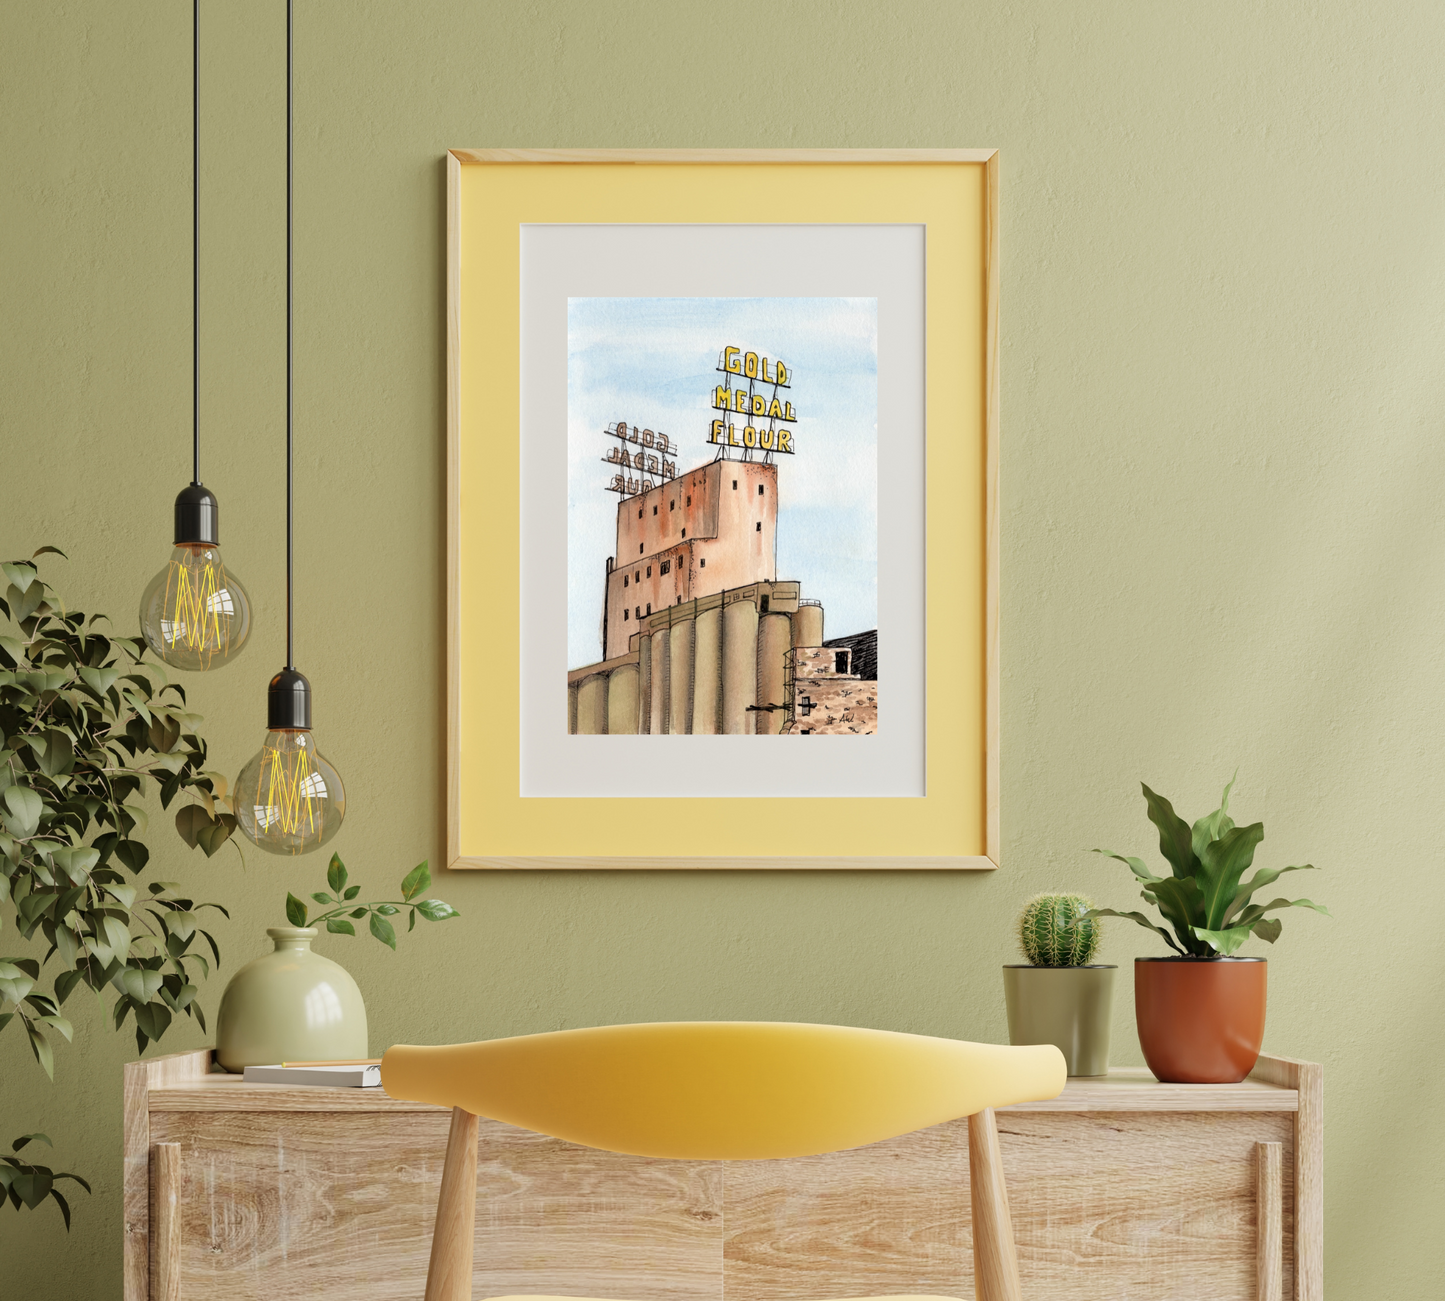 Gold Medal Flour Building in Minneapolis - Pen and Watercolor Art - Archival Quality Art Print